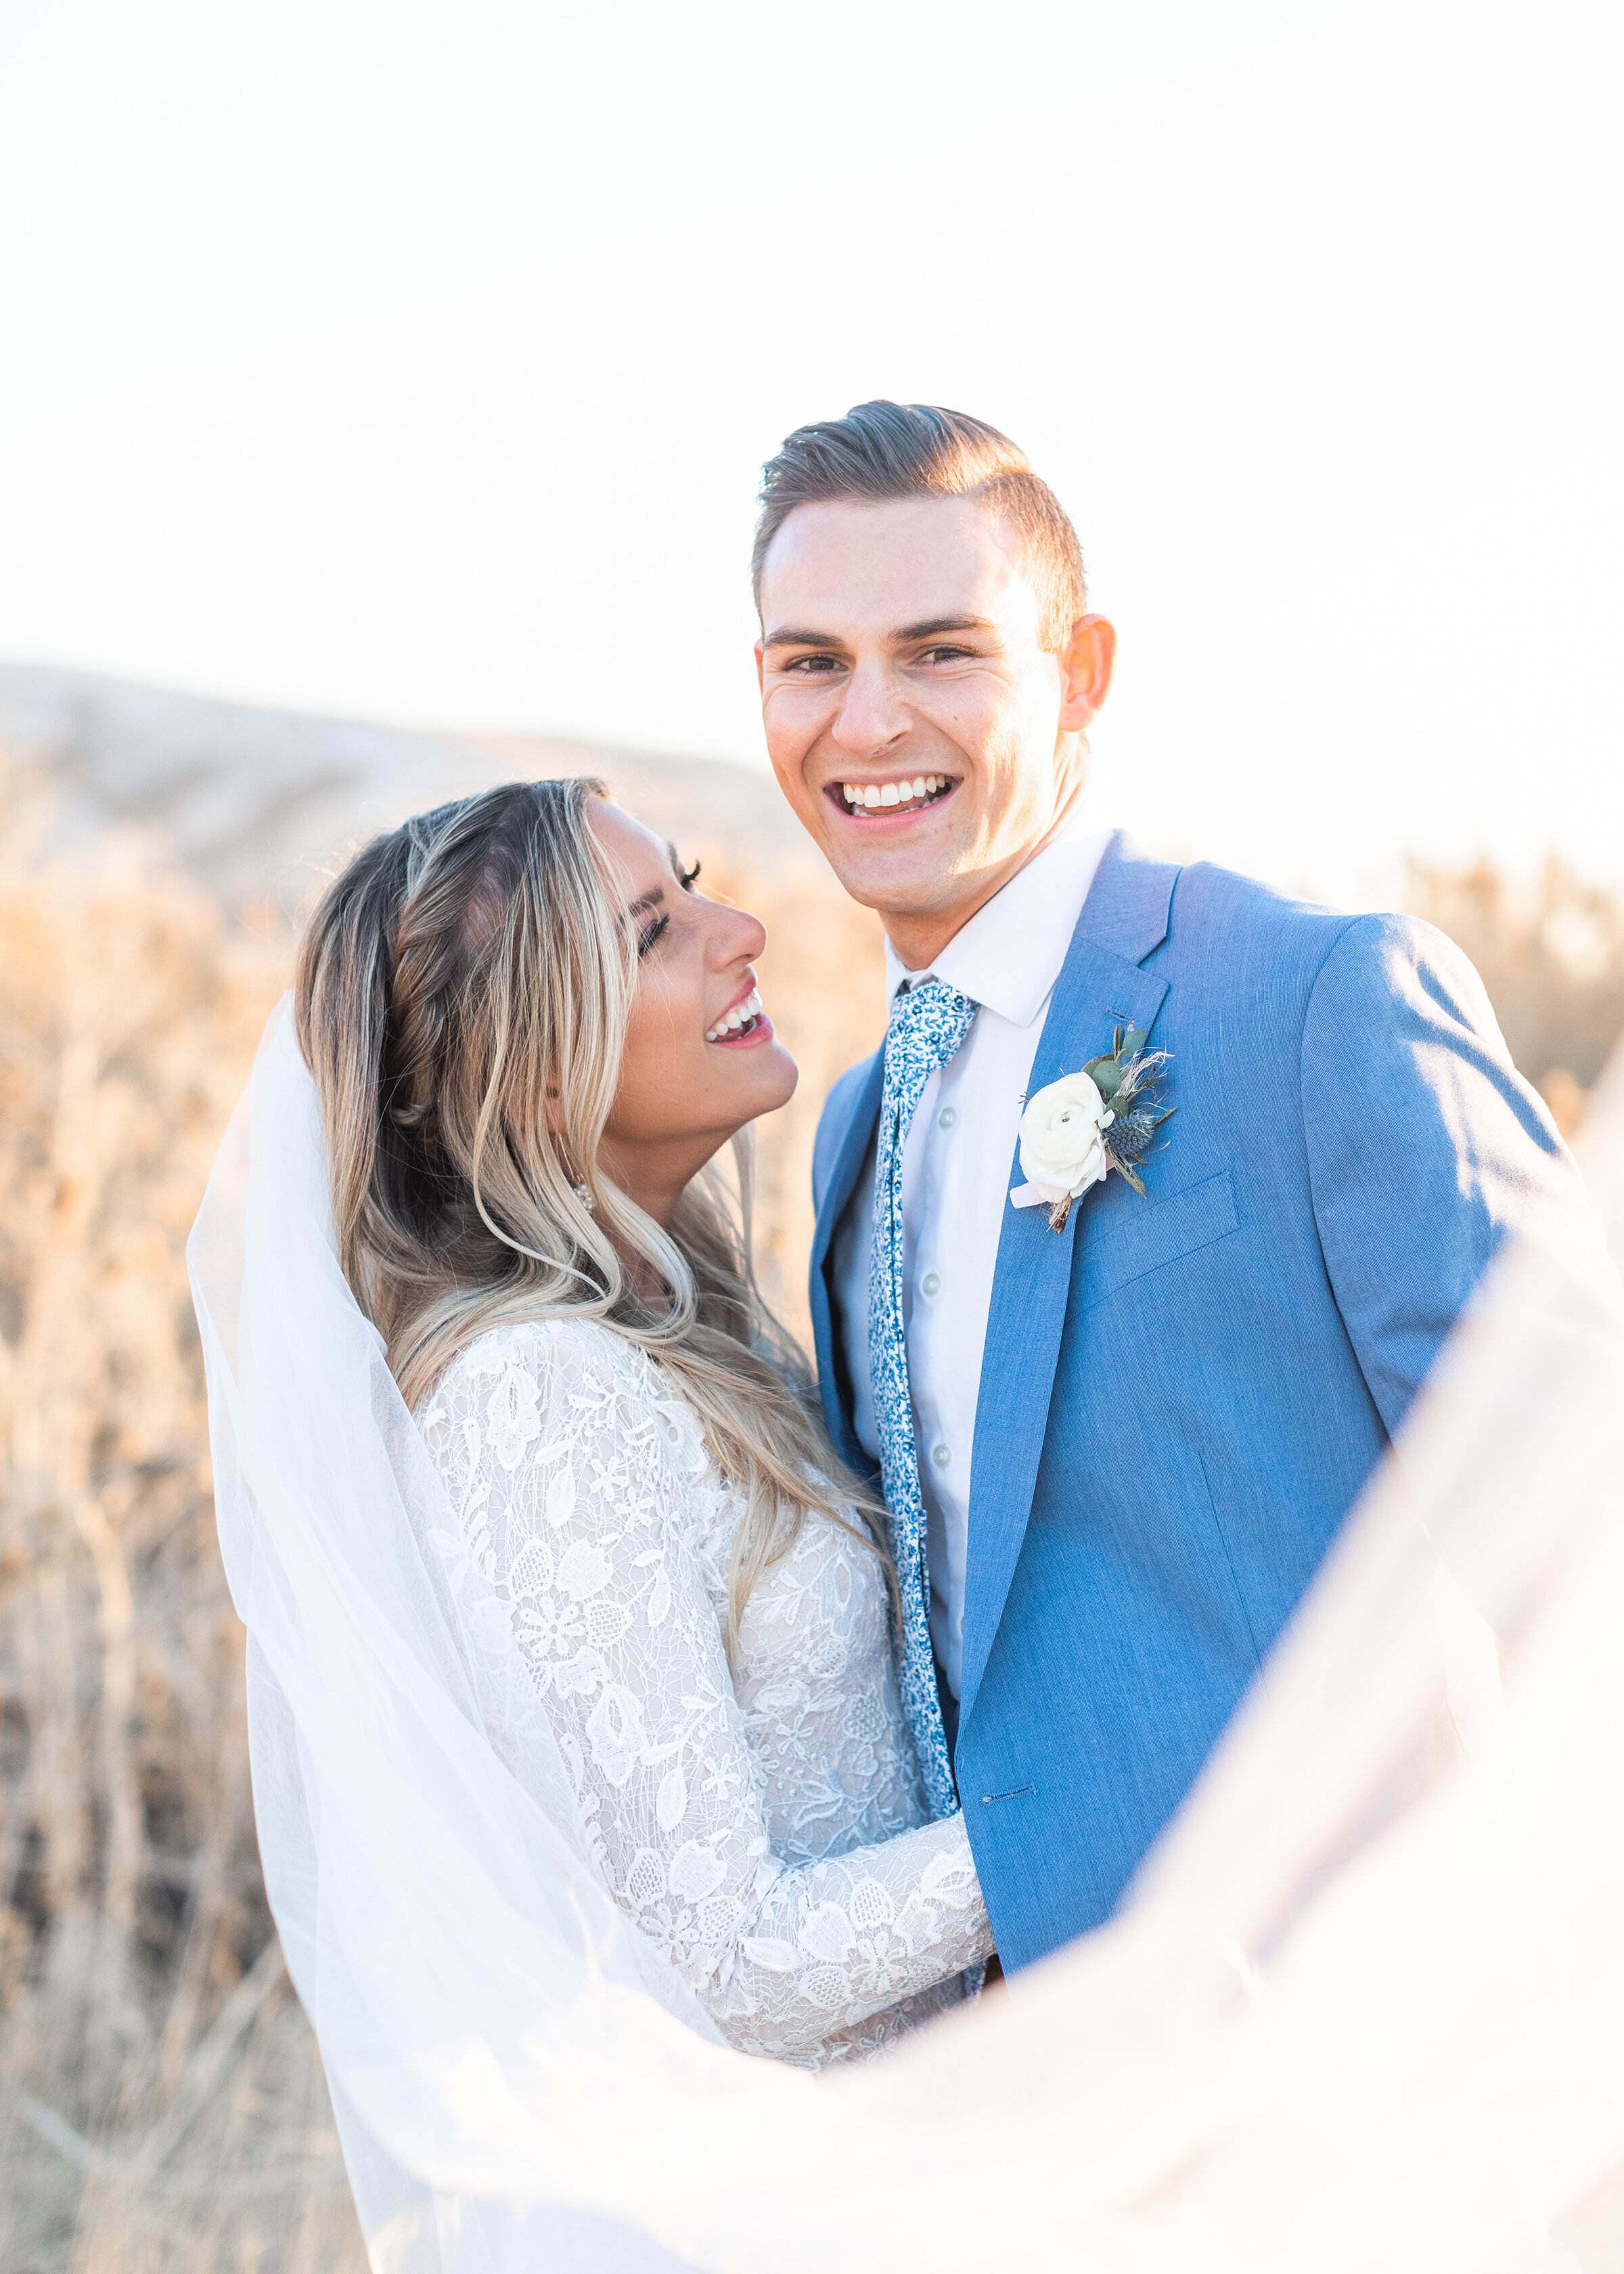  Surrounded by a field filled with tall grass, Clarity Lane Photography captures a bride and groom laughing together during their bridal session at Tunnel Springs Park in Salt Lake City, Utah. long billowy wedding veil, laughing bride and groom, brid